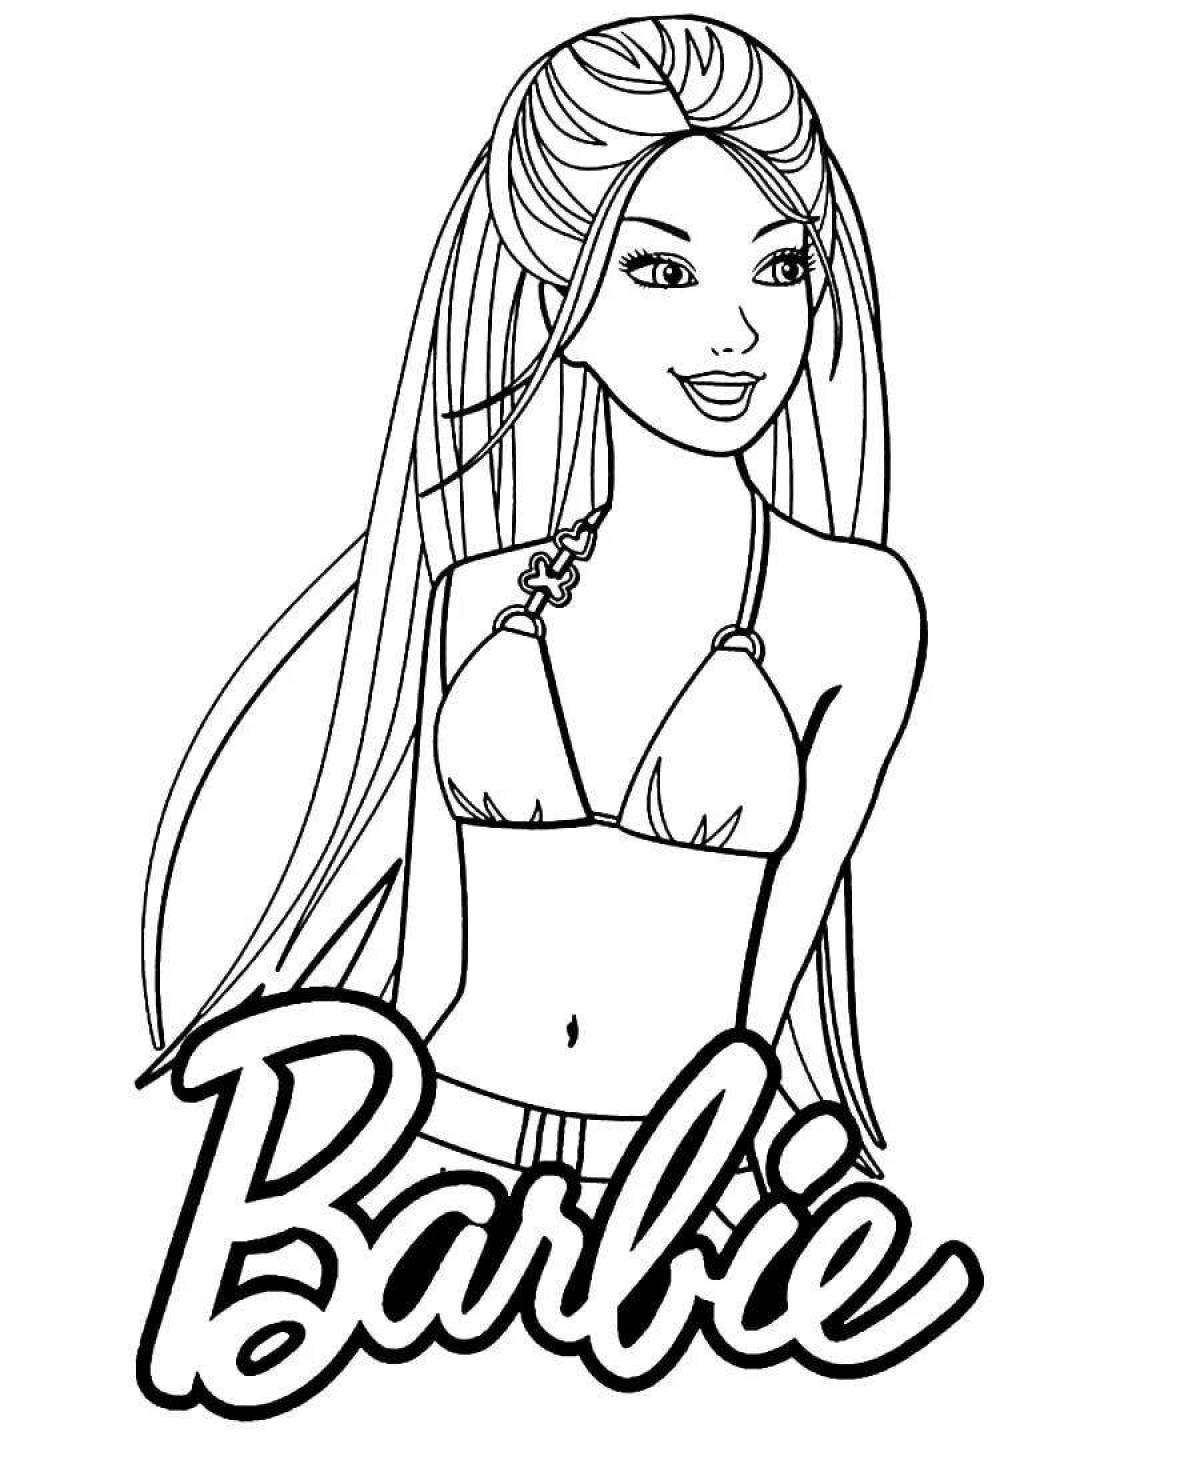 Playful coloring of barbie doll